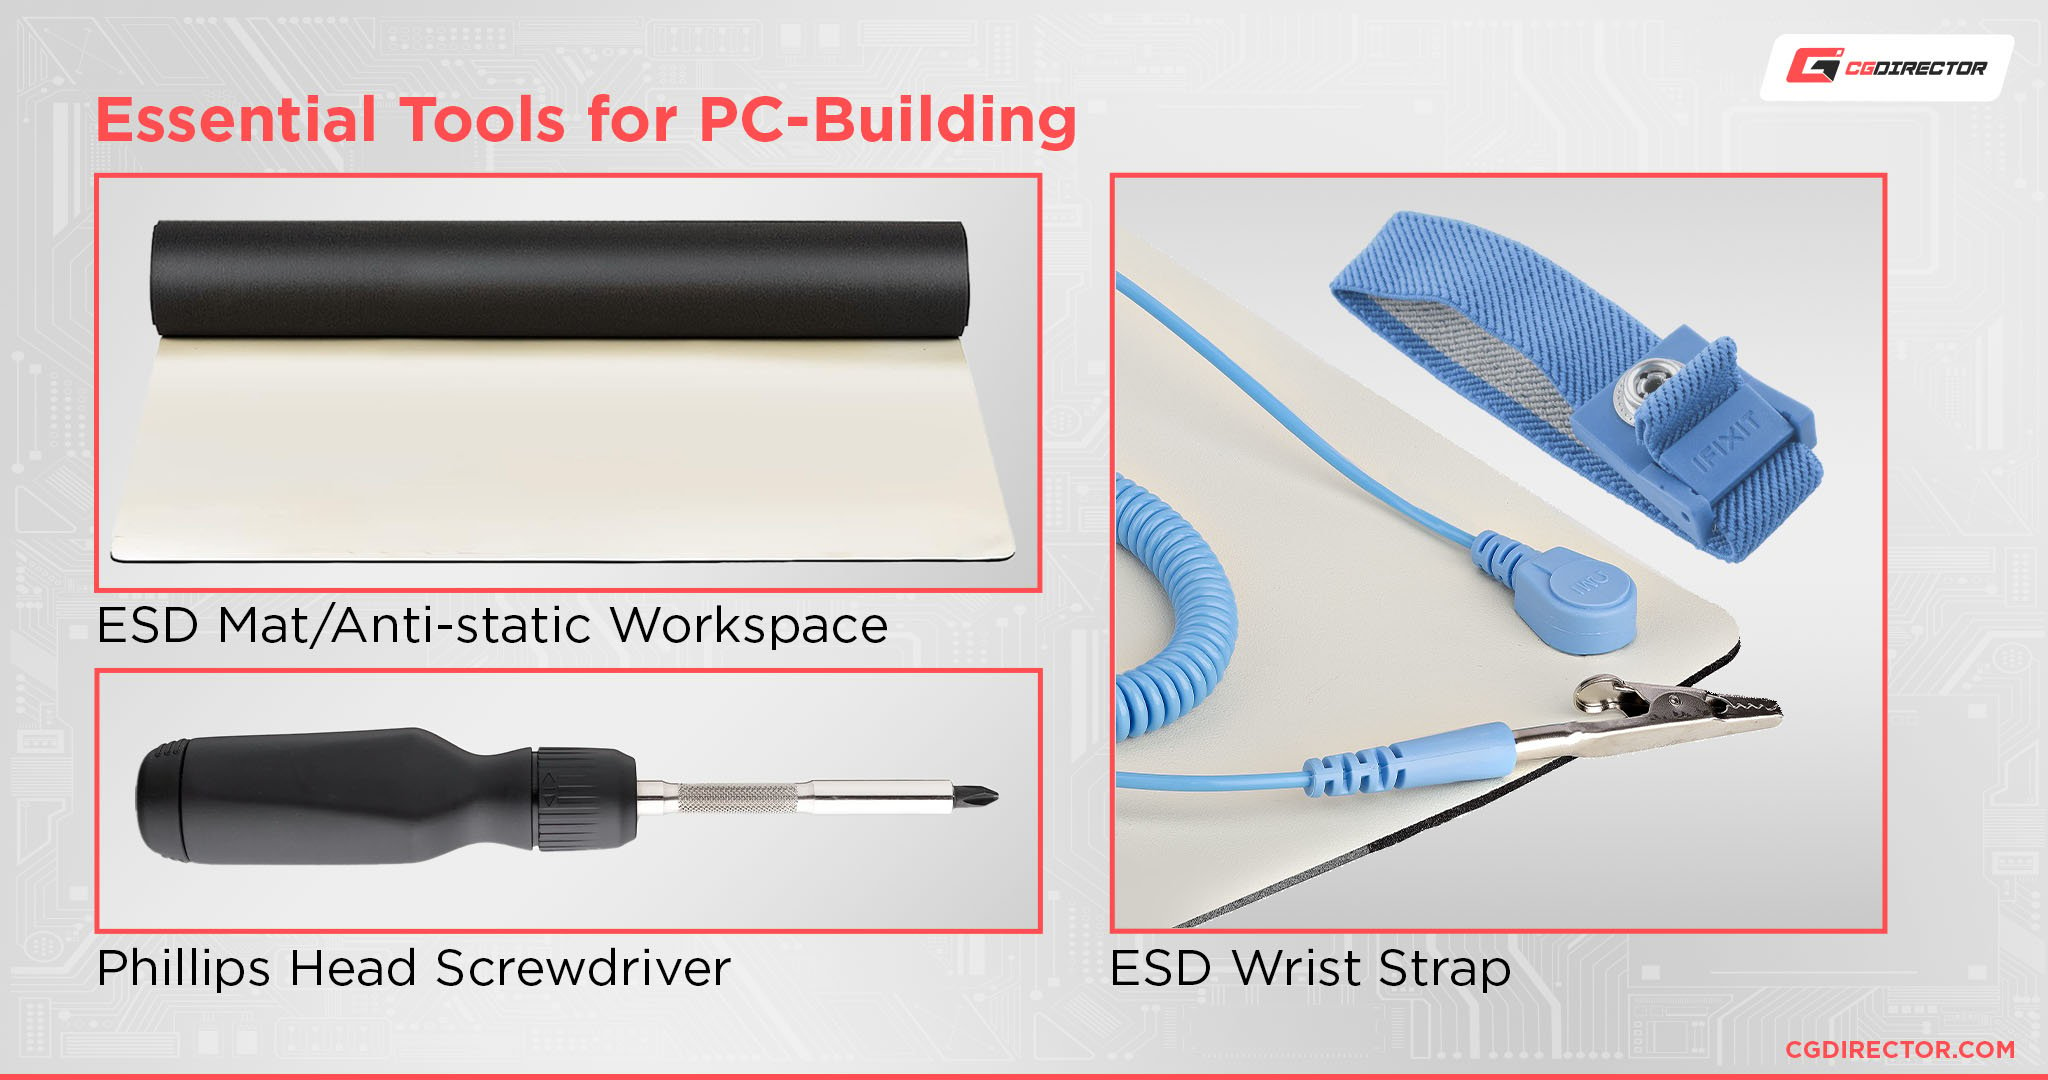 Essential Tools for PC-Building